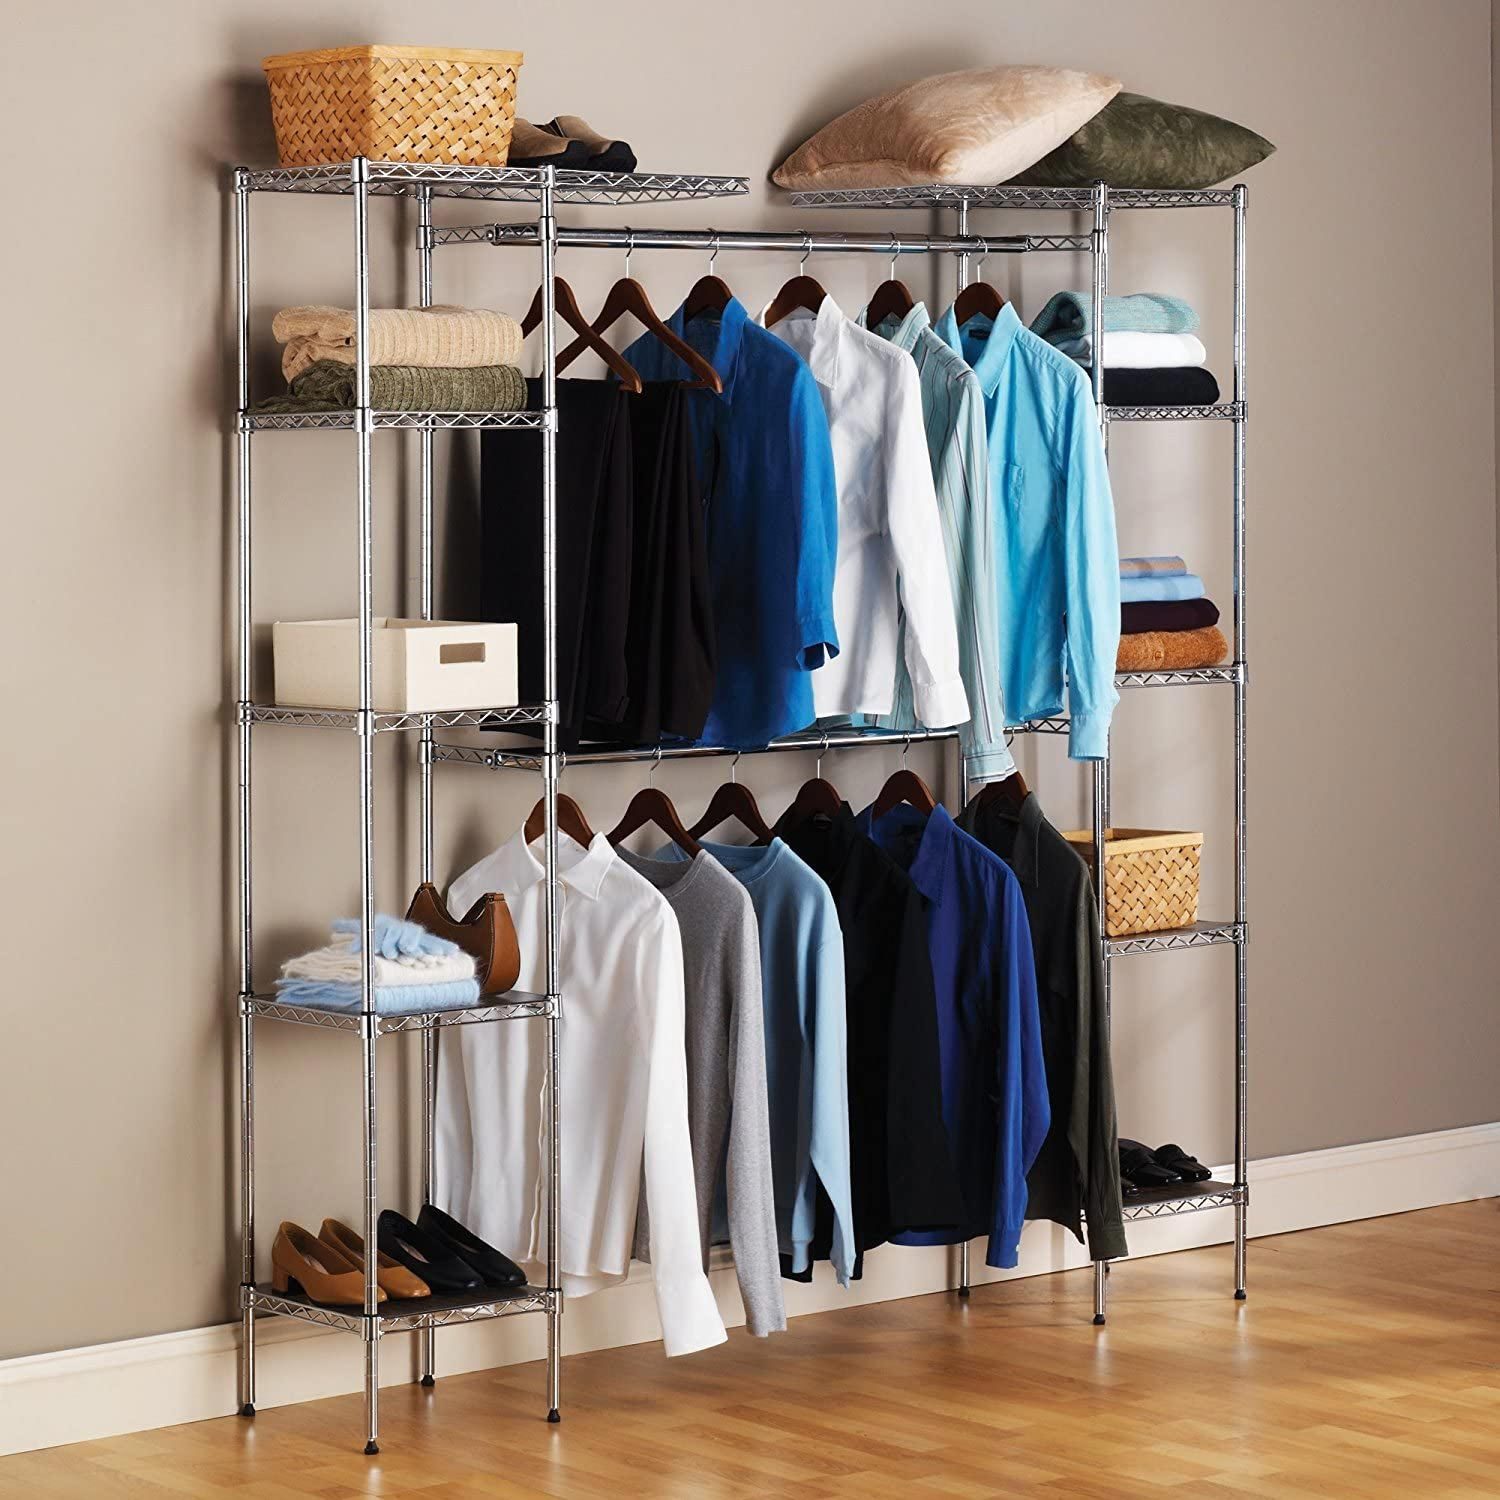 https://www.familyhandyman.com/wp-content/uploads/2021/05/6-Best-Closet-Organizer-Products-to-Keep-Your-Clothes-Tidy_FT.jpg